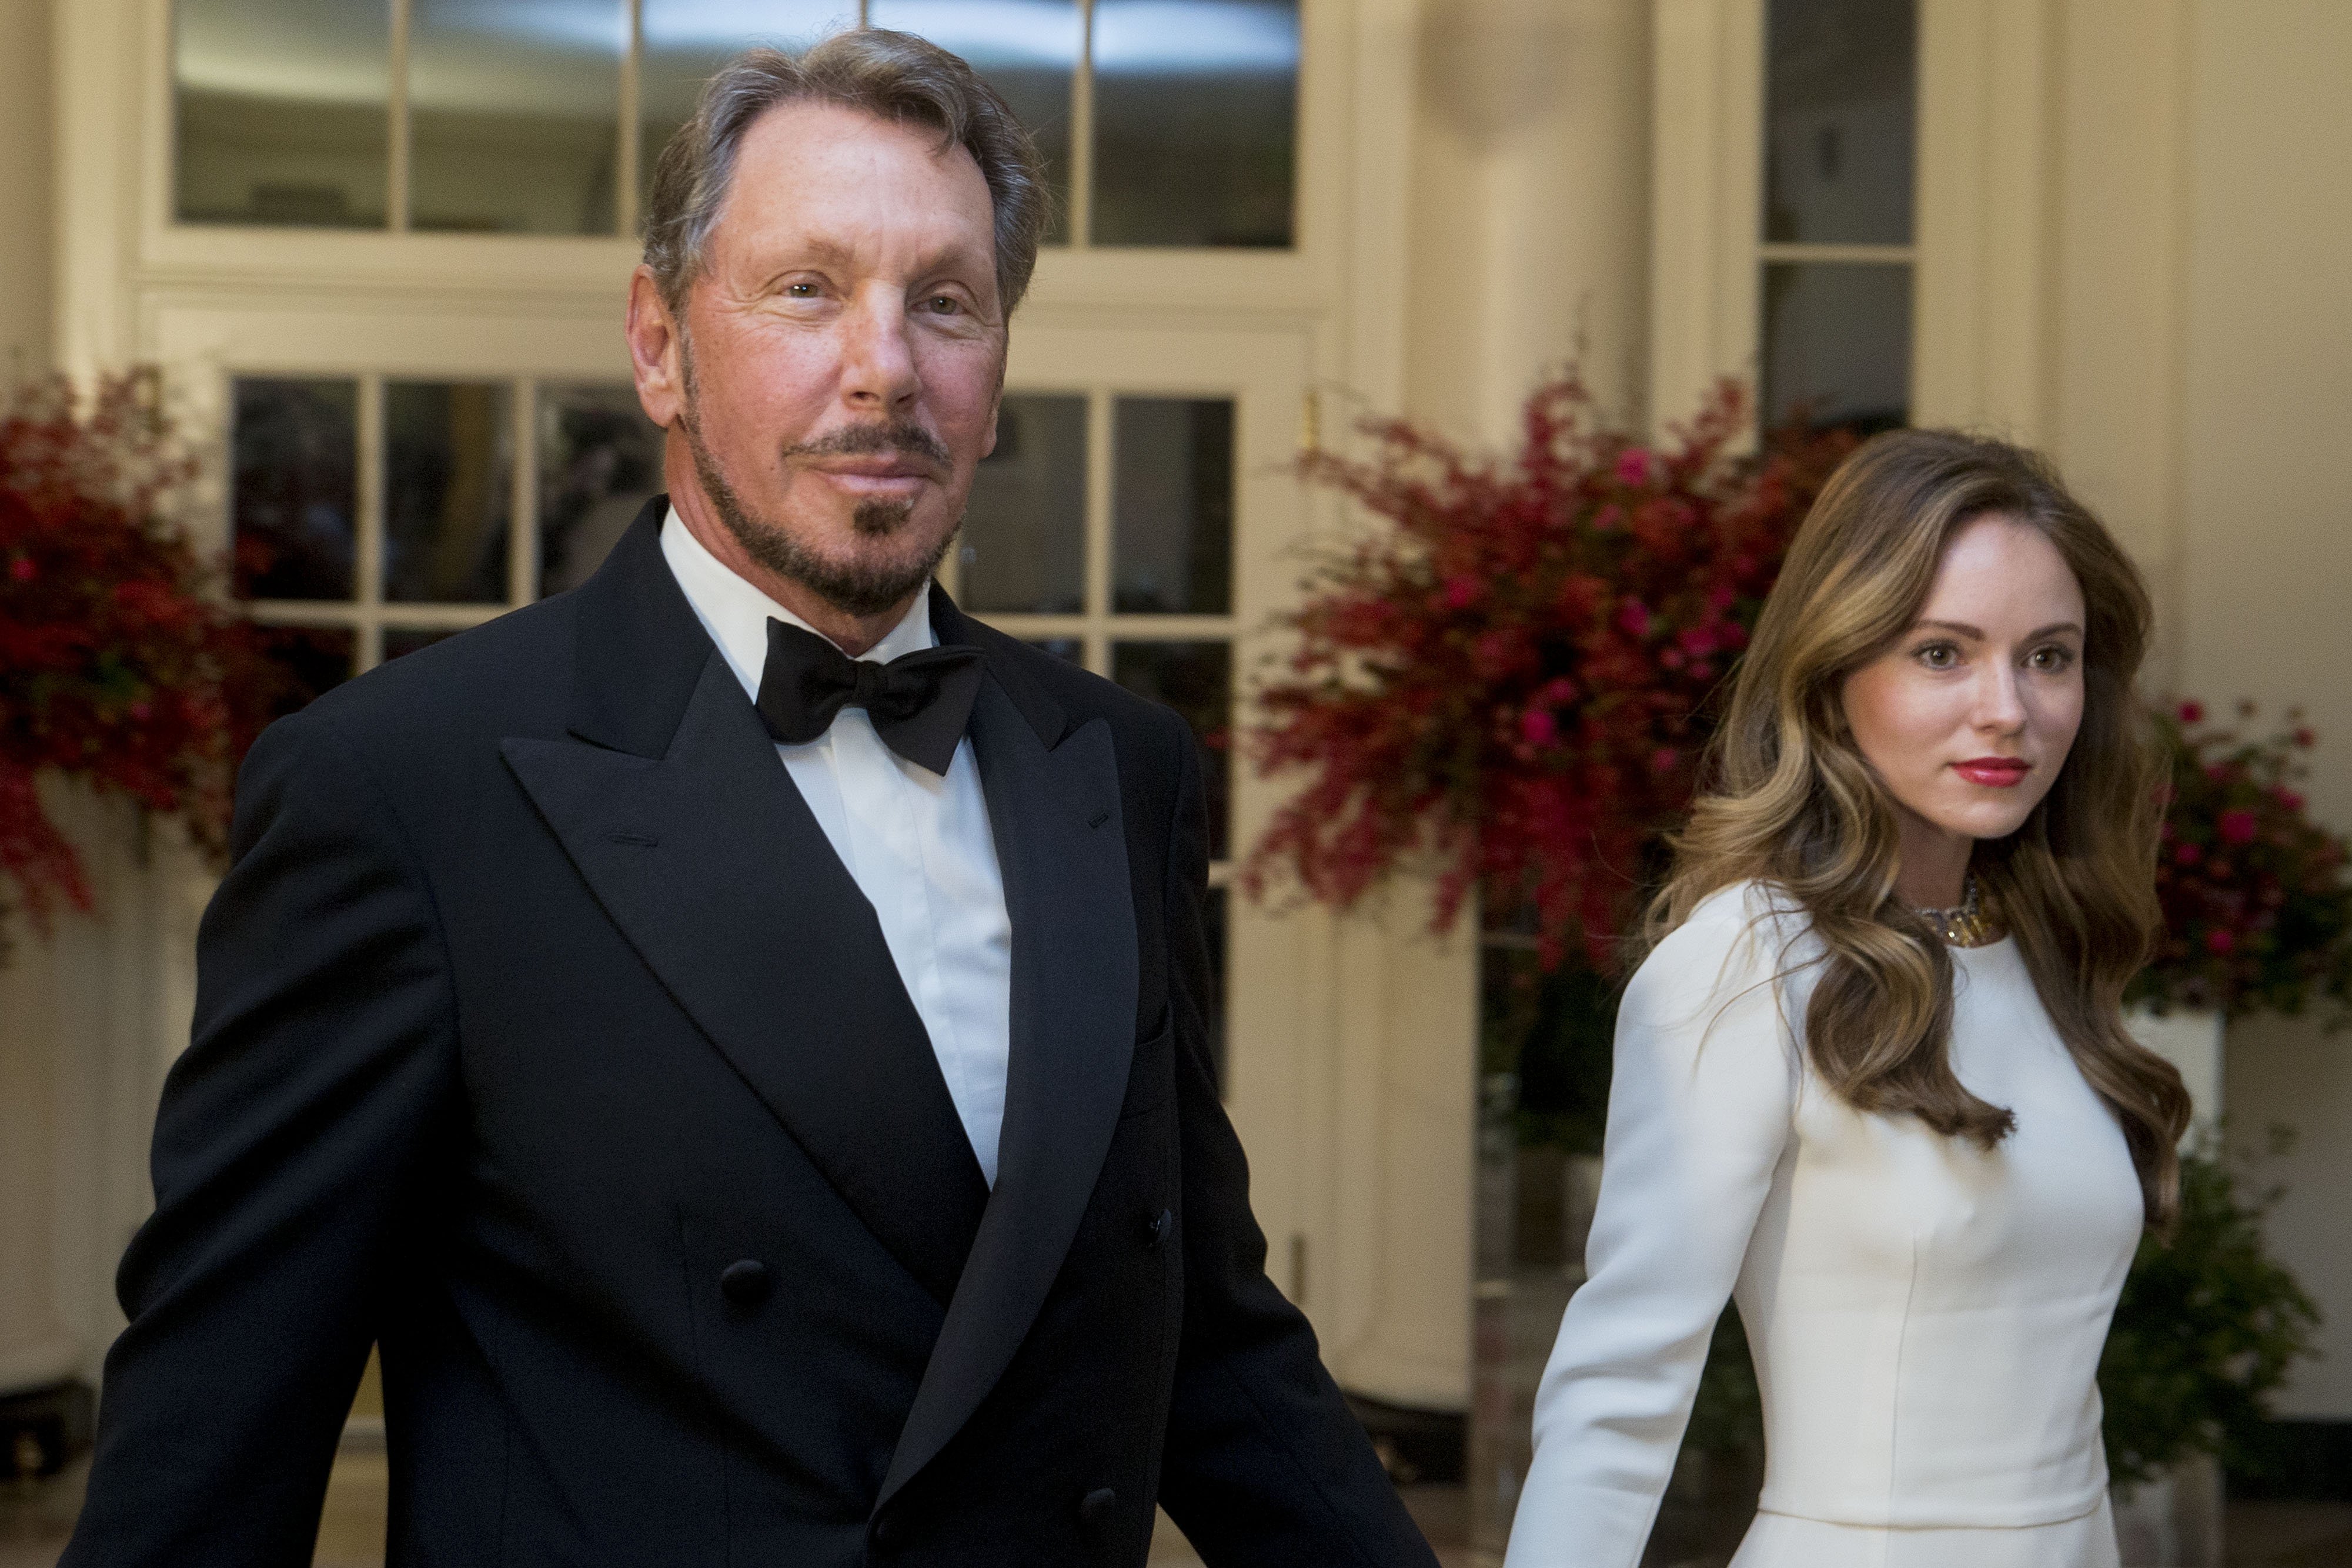 Billionaire Larry Ellison and Nikita Kahn arrive at a state dinner in honor of Chinese President Xi Jinping at the White House in Washington, D.C., U.S., on Friday, Sept. 25, 2015. | Source: Getty Images 